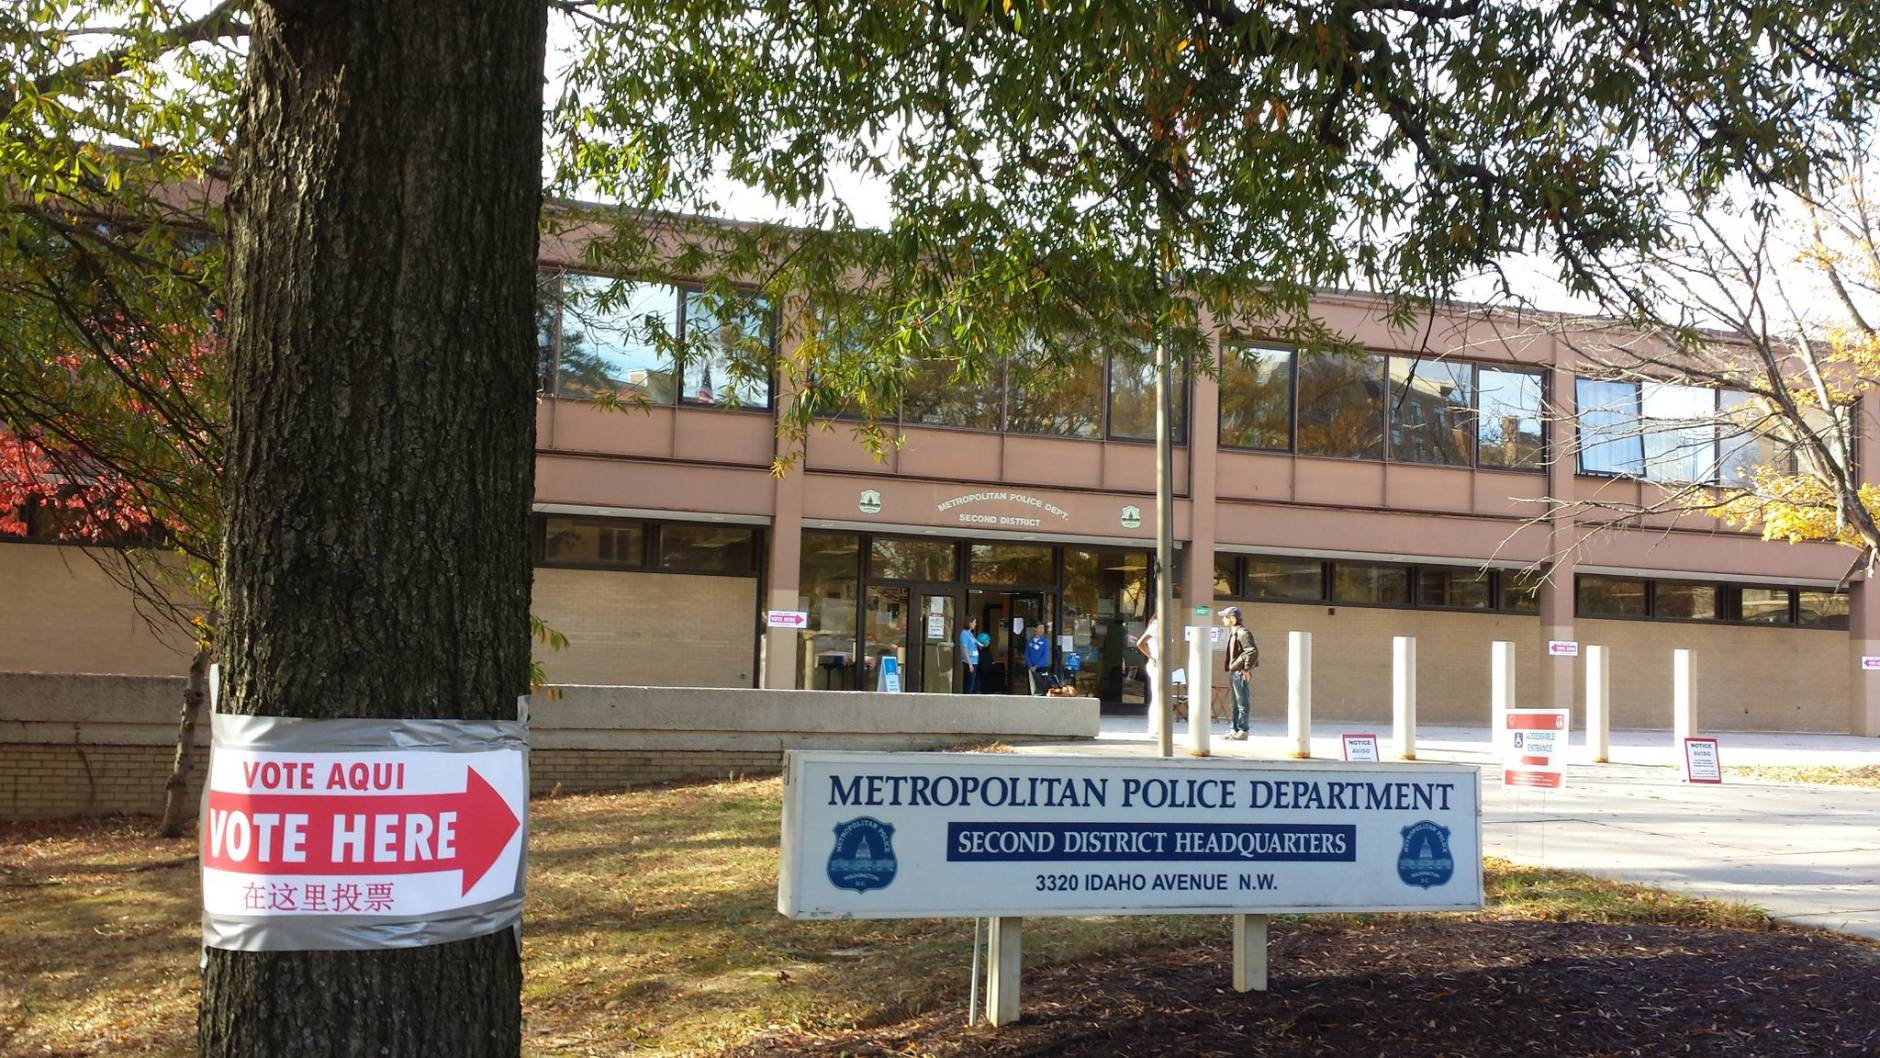 The voting place at MPDC 2nd District headquarters in Northwest D.C. is free and clear of lines in the afternoon, though the line extended outside the door a few times in the morning. (Courtesy Brandon Millman via Twitter)